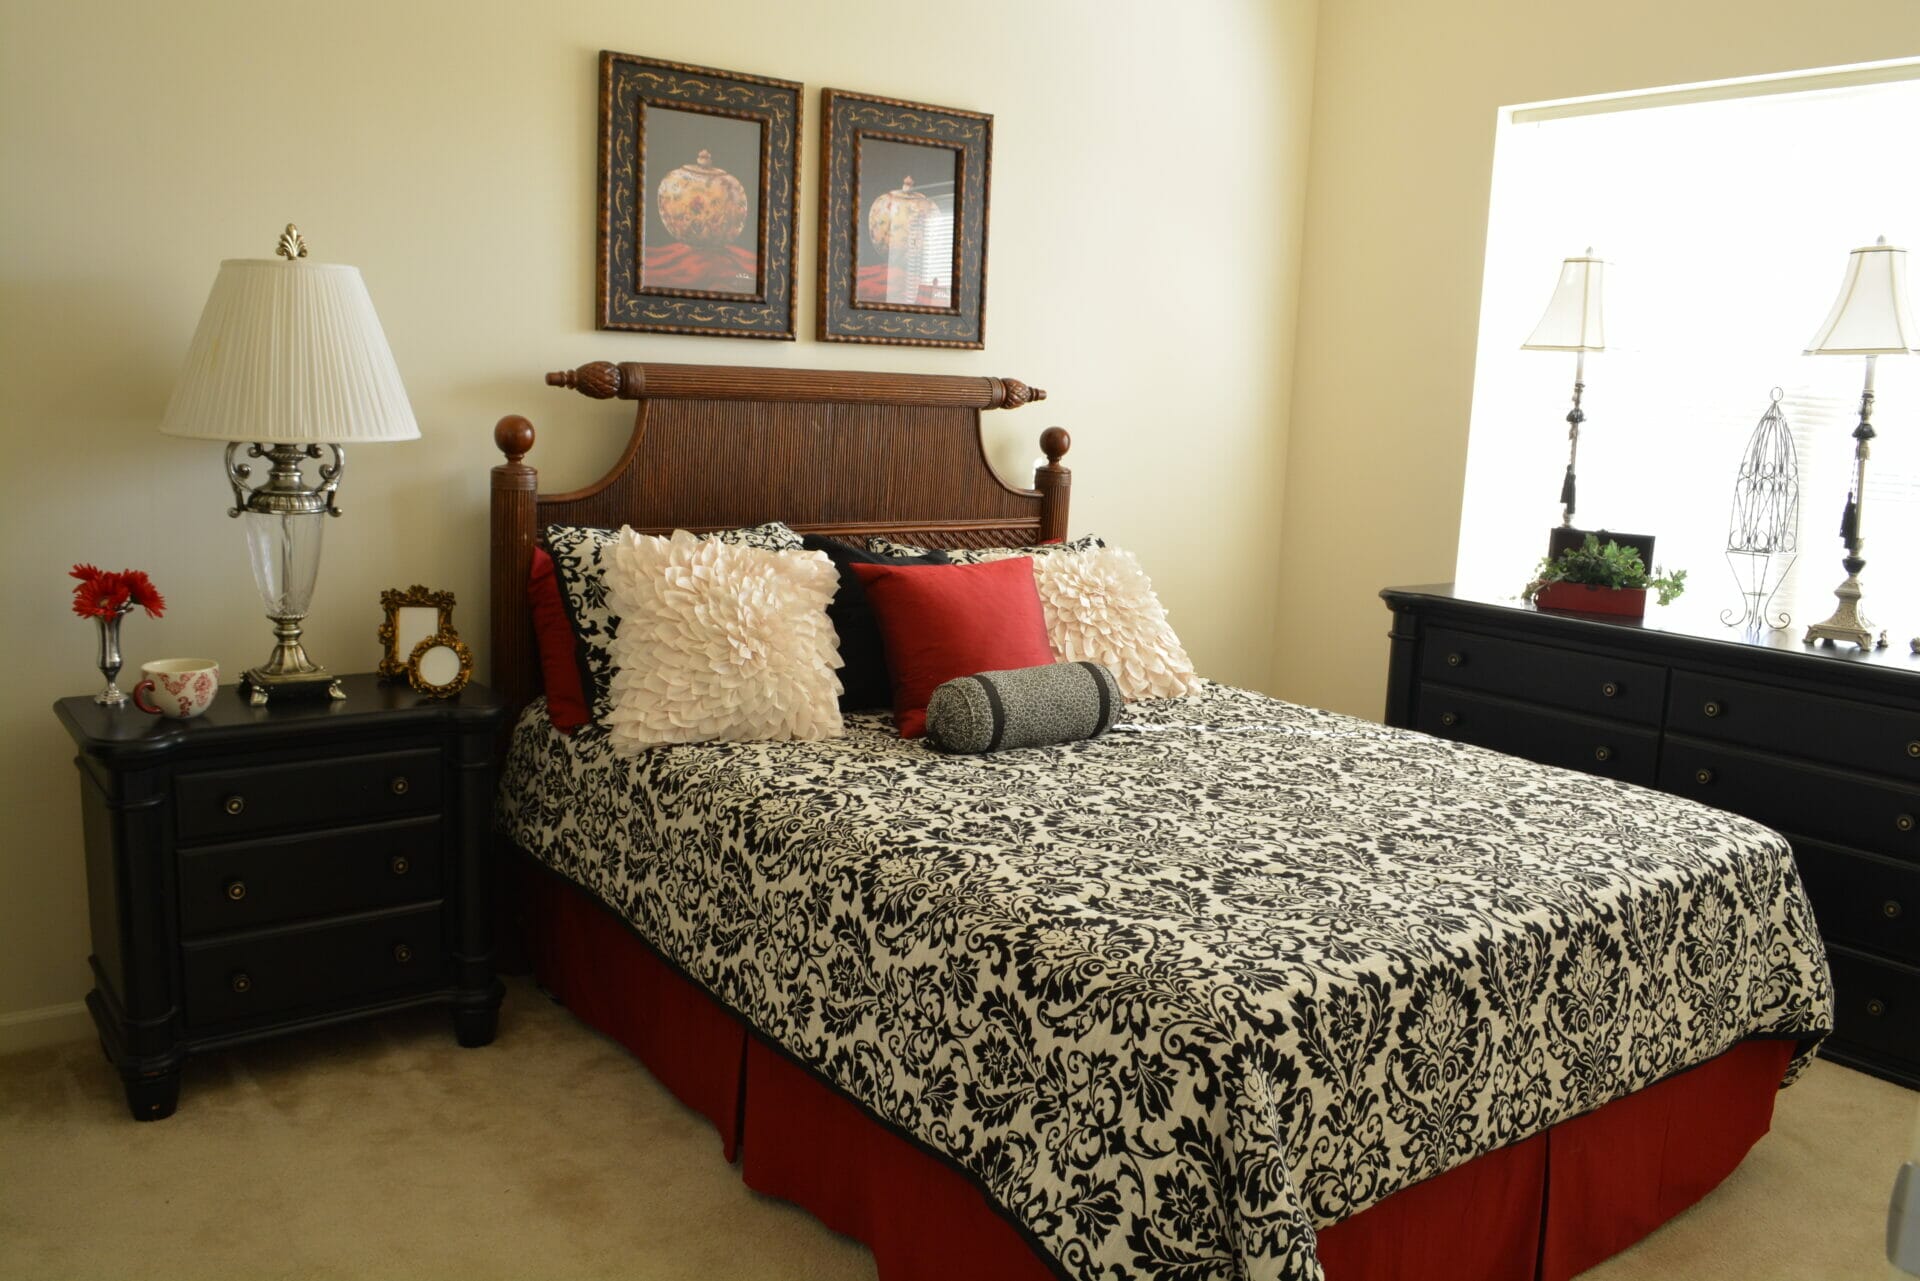 <span  class="uc_style_uc_tiles_grid_image_elementor_uc_items_attribute_title" style="color:#000000;">Allisonville Meadows Assisted Living model bedroom. </span>